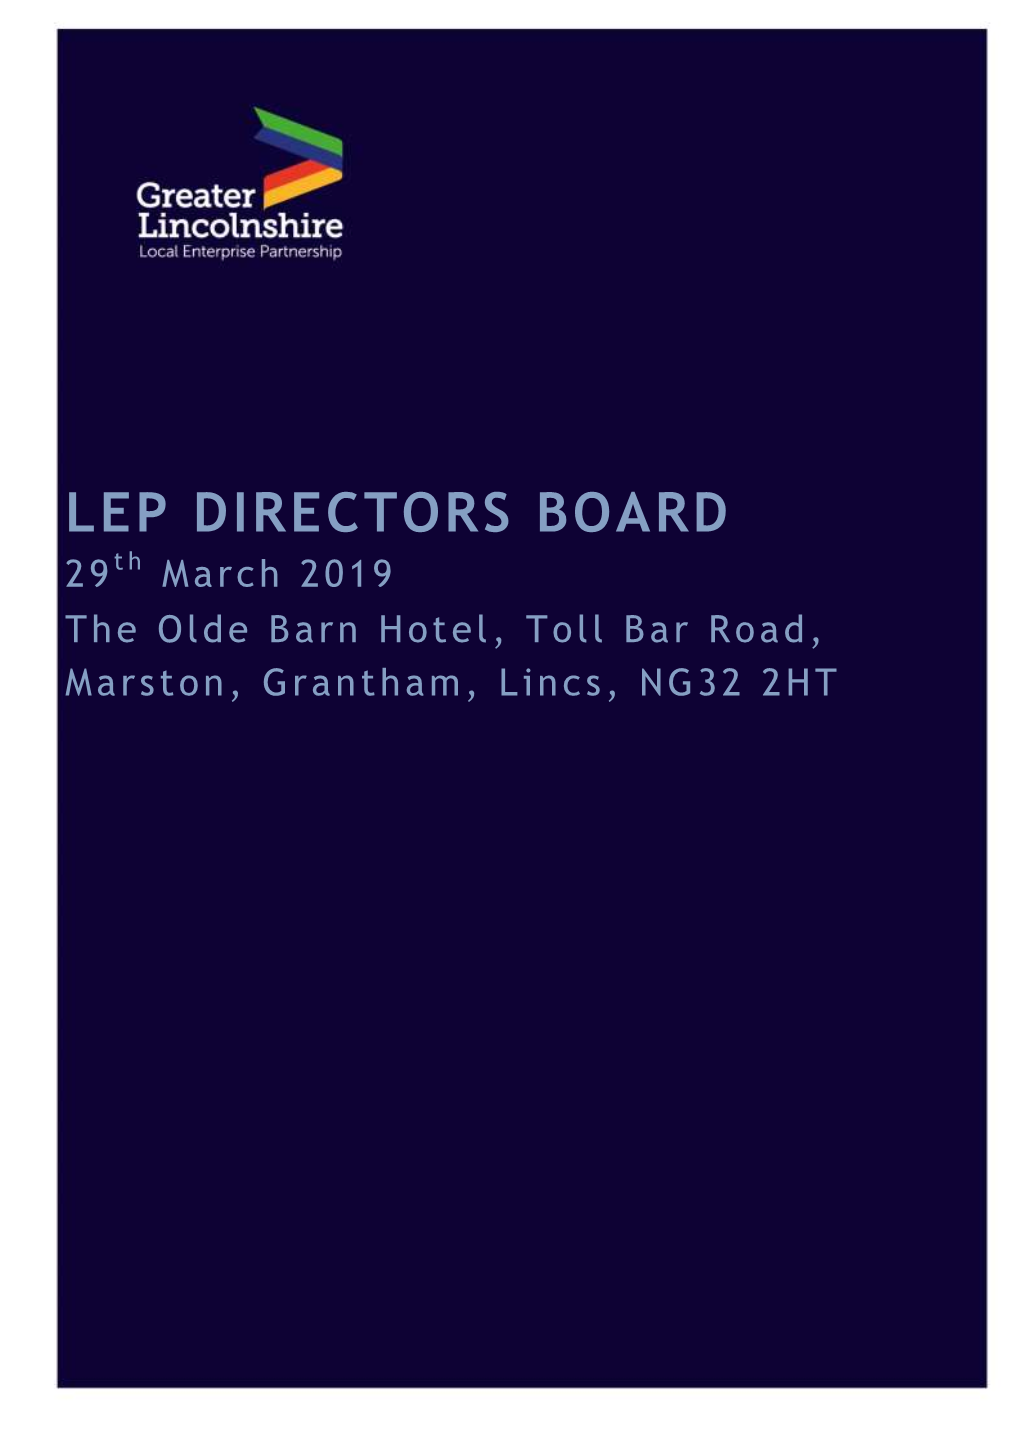 LEP DIRECTORS BOARD 29Th March 2019 the Olde Barn Hotel, Toll Bar Road, Marston, Grantham, Lincs, NG32 2HT Paper 0 – Revised Agenda